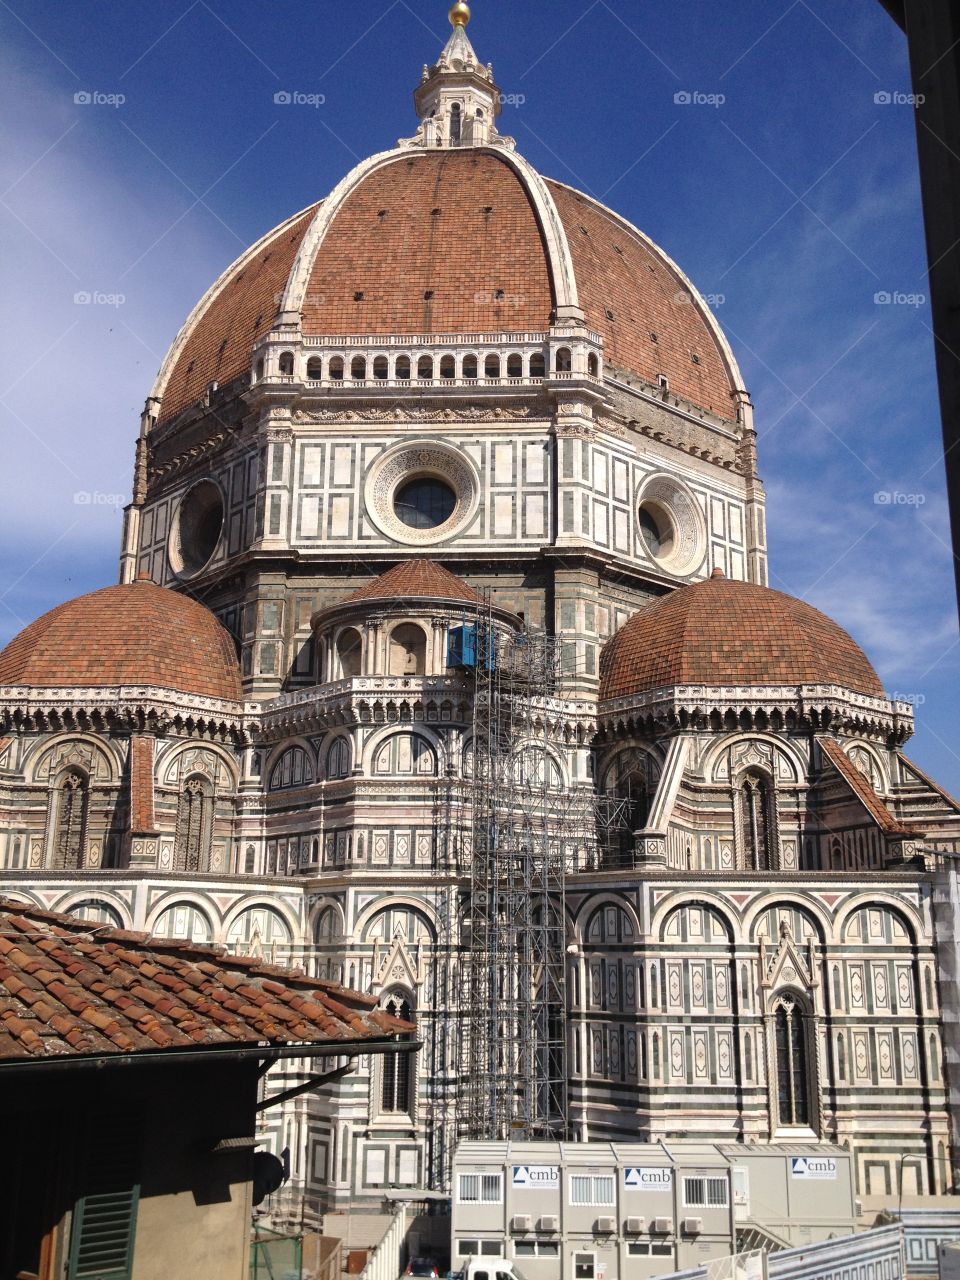 Duomo of Florence. This is the Duomo of Florence Italy. It was once the biggest church in Italy